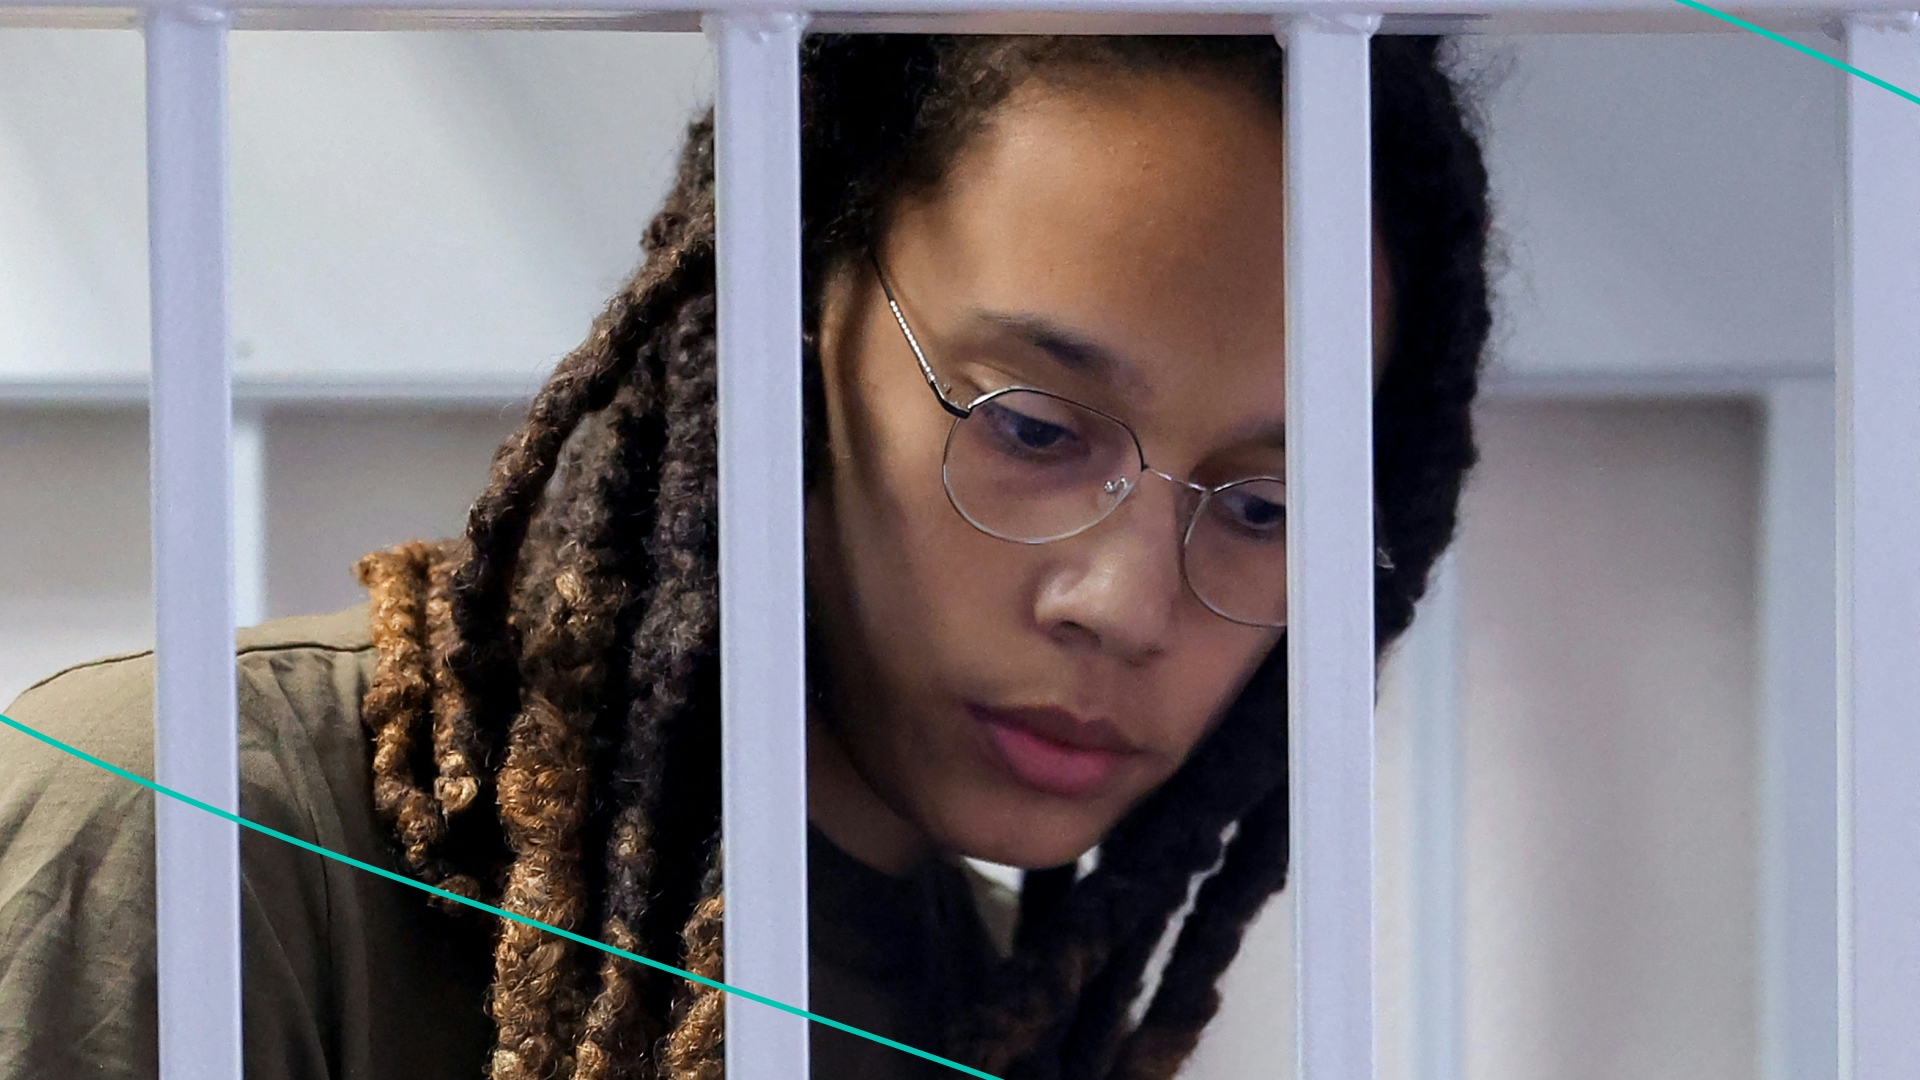 Brittney Griner stands in a defendants' cage before a court hearing